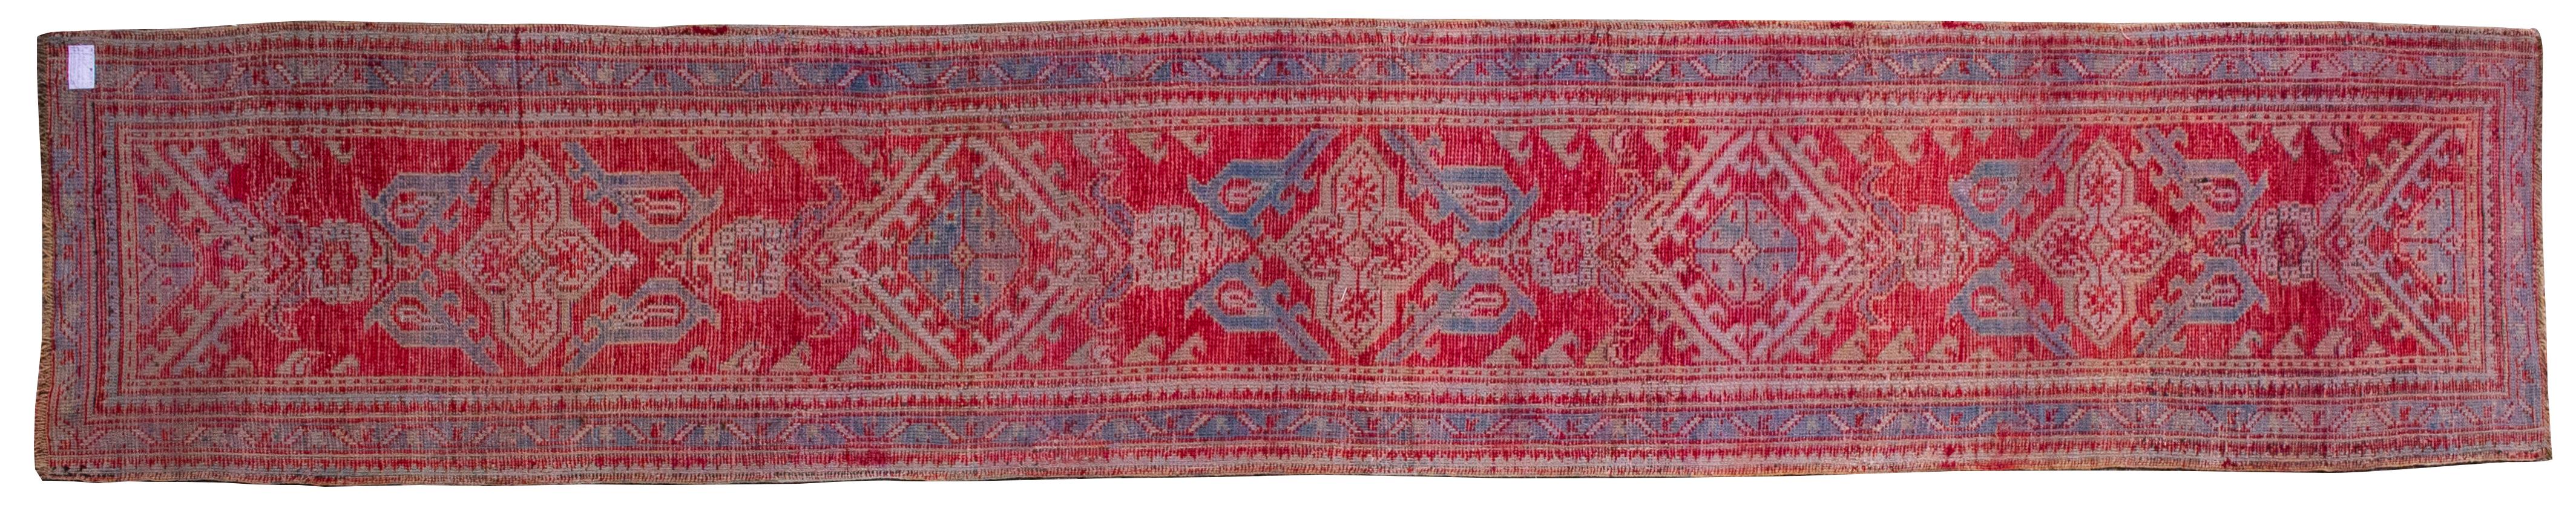 Rare size for this antique beautiful Turkish runner: its typical red color is suitable for the spaces with little light, like corridors; but the color explodes in the sunlight!
The Ushak is one of the more famous carpets in the world, used in